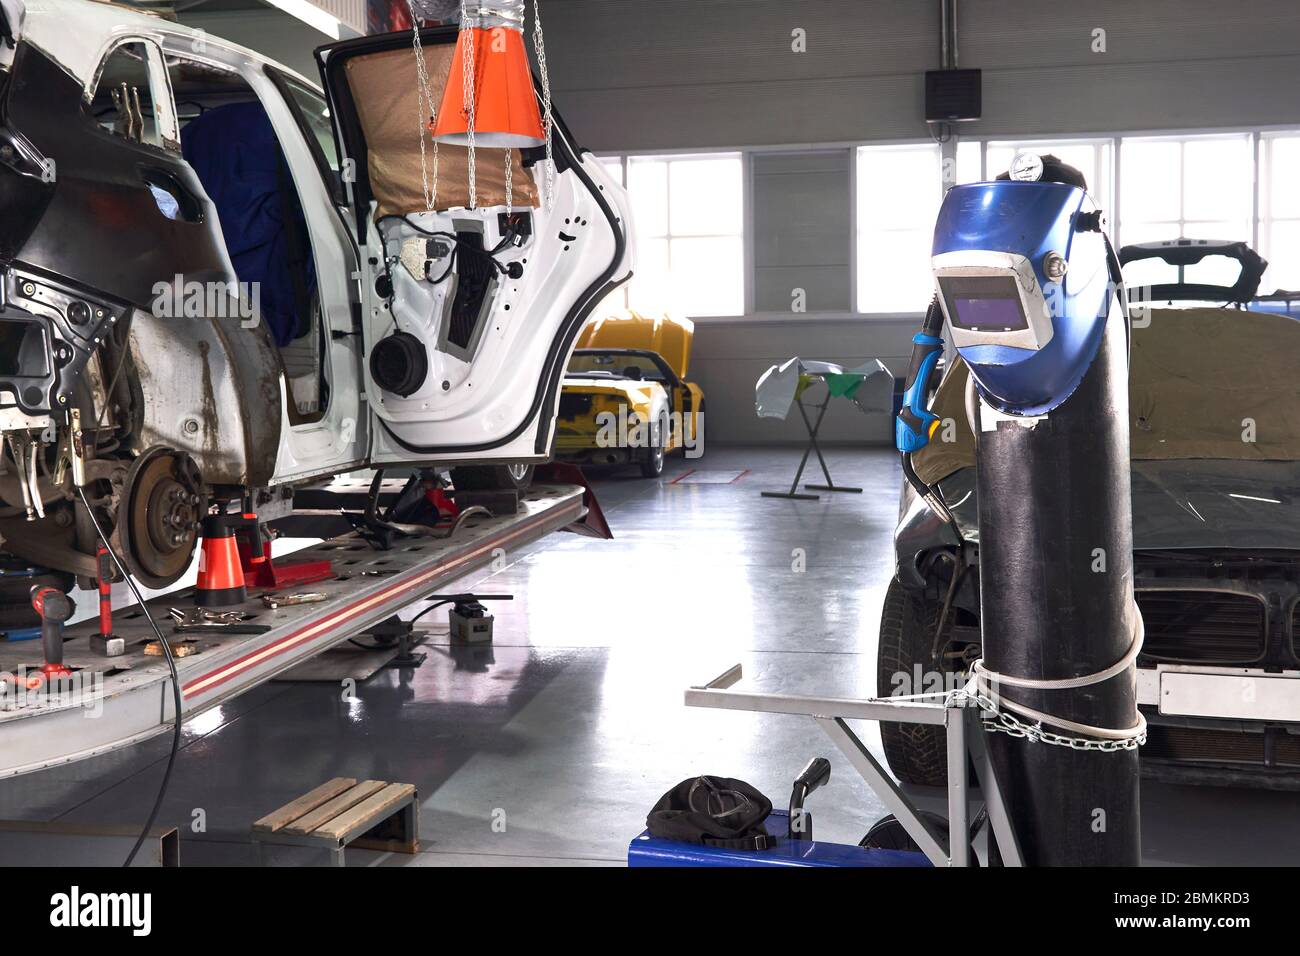 Welding equipment in a car repair station, helmet hanging on a gas tank, no people Stock Photo